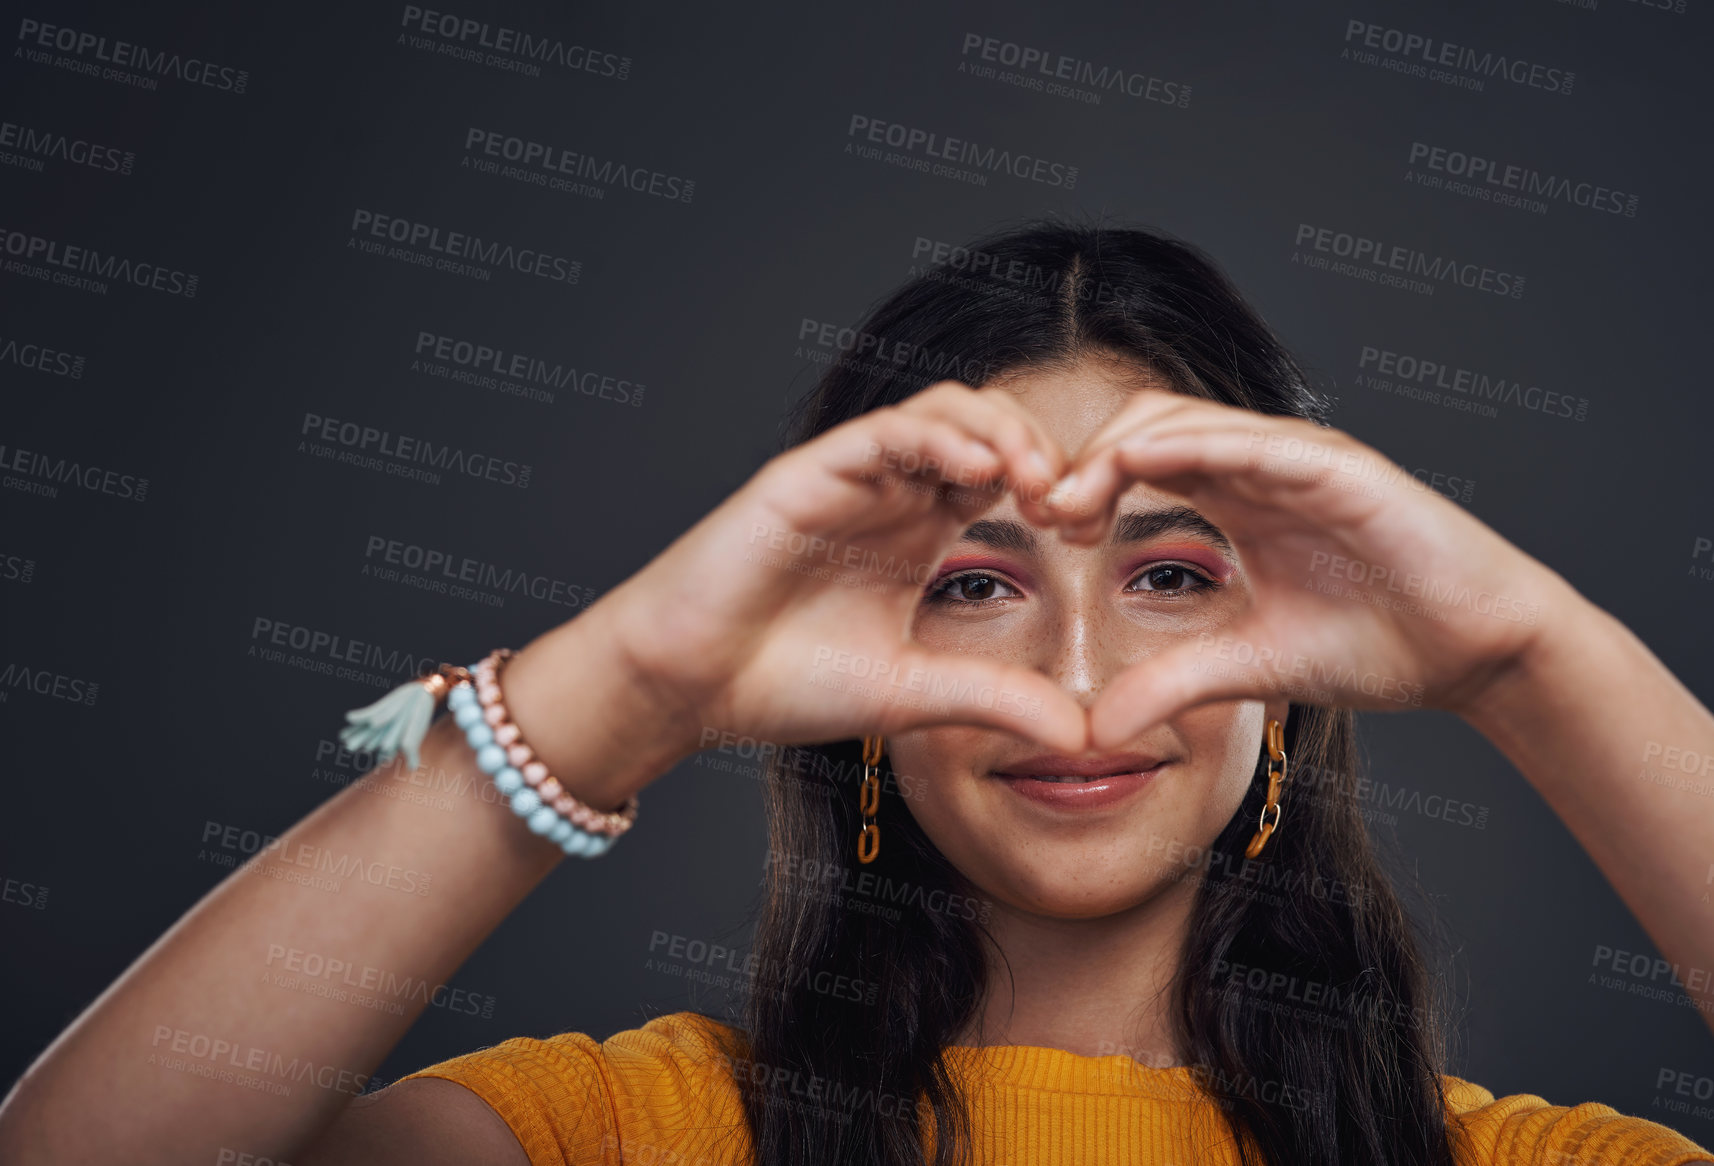 Buy stock photo Cropped portrait of an attractive teenage girl making a heart-shaped hand gesture against a dark studio background